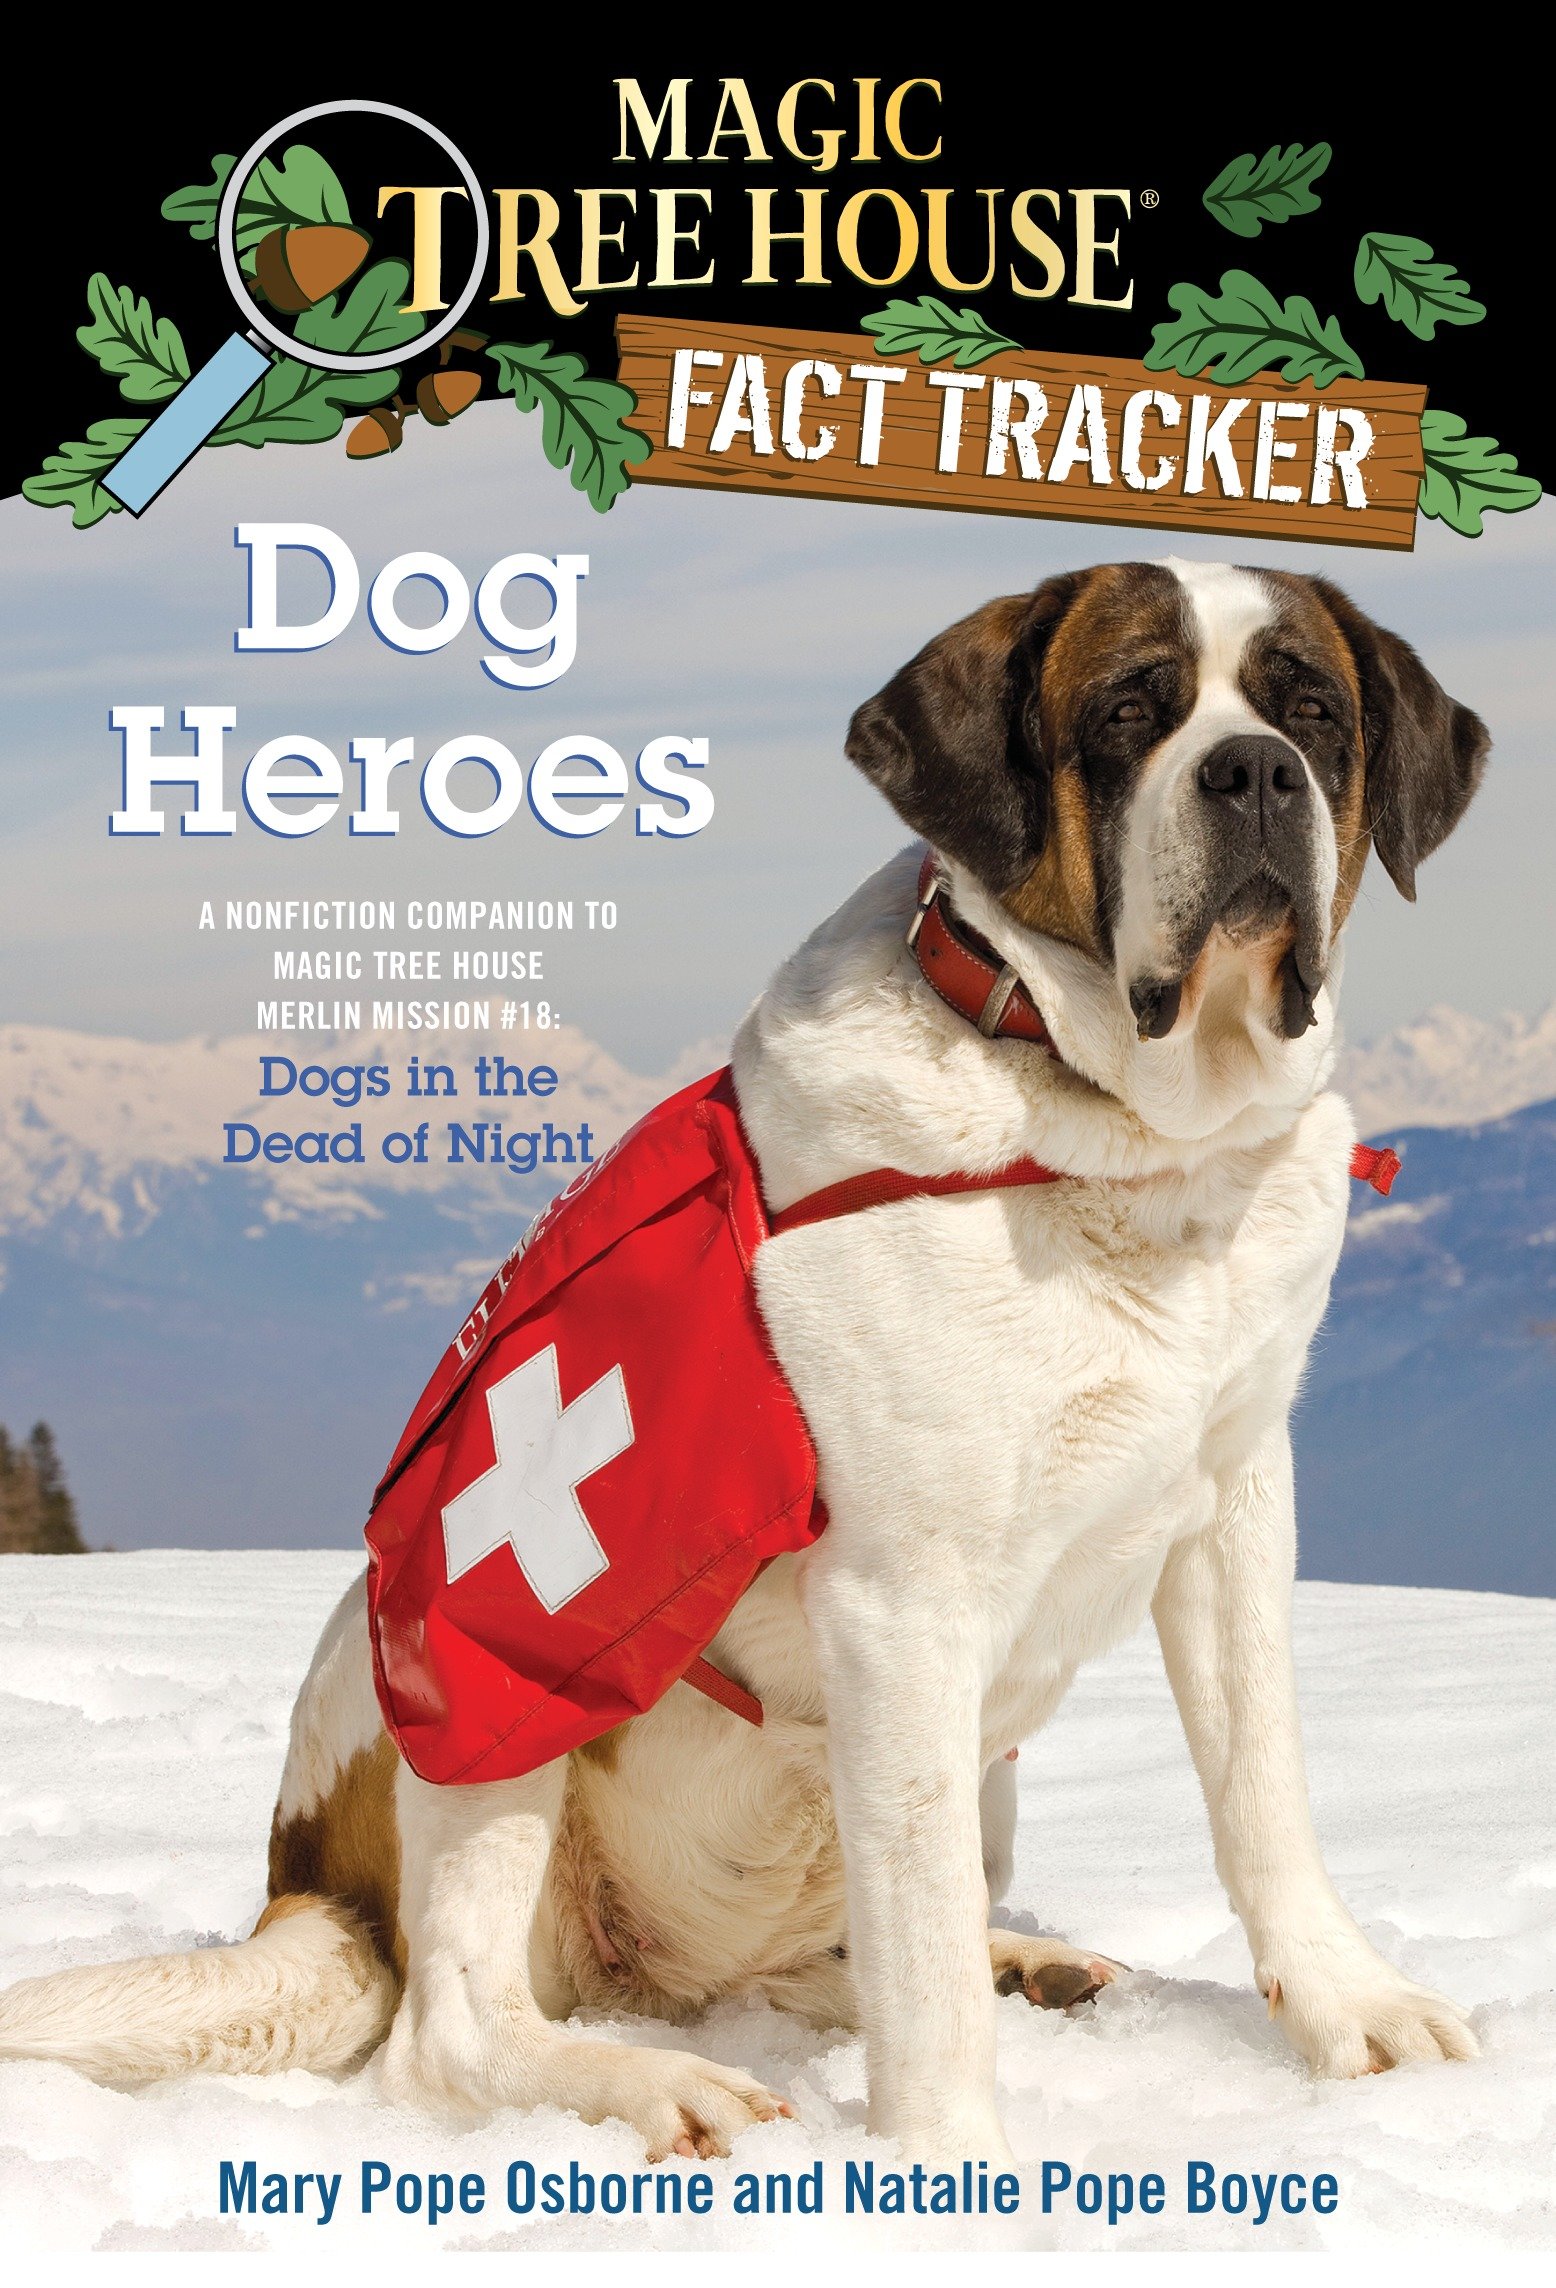 Dog heroes a nonfiction companion to Magic tree house #46: Dogs in the dead of night cover image